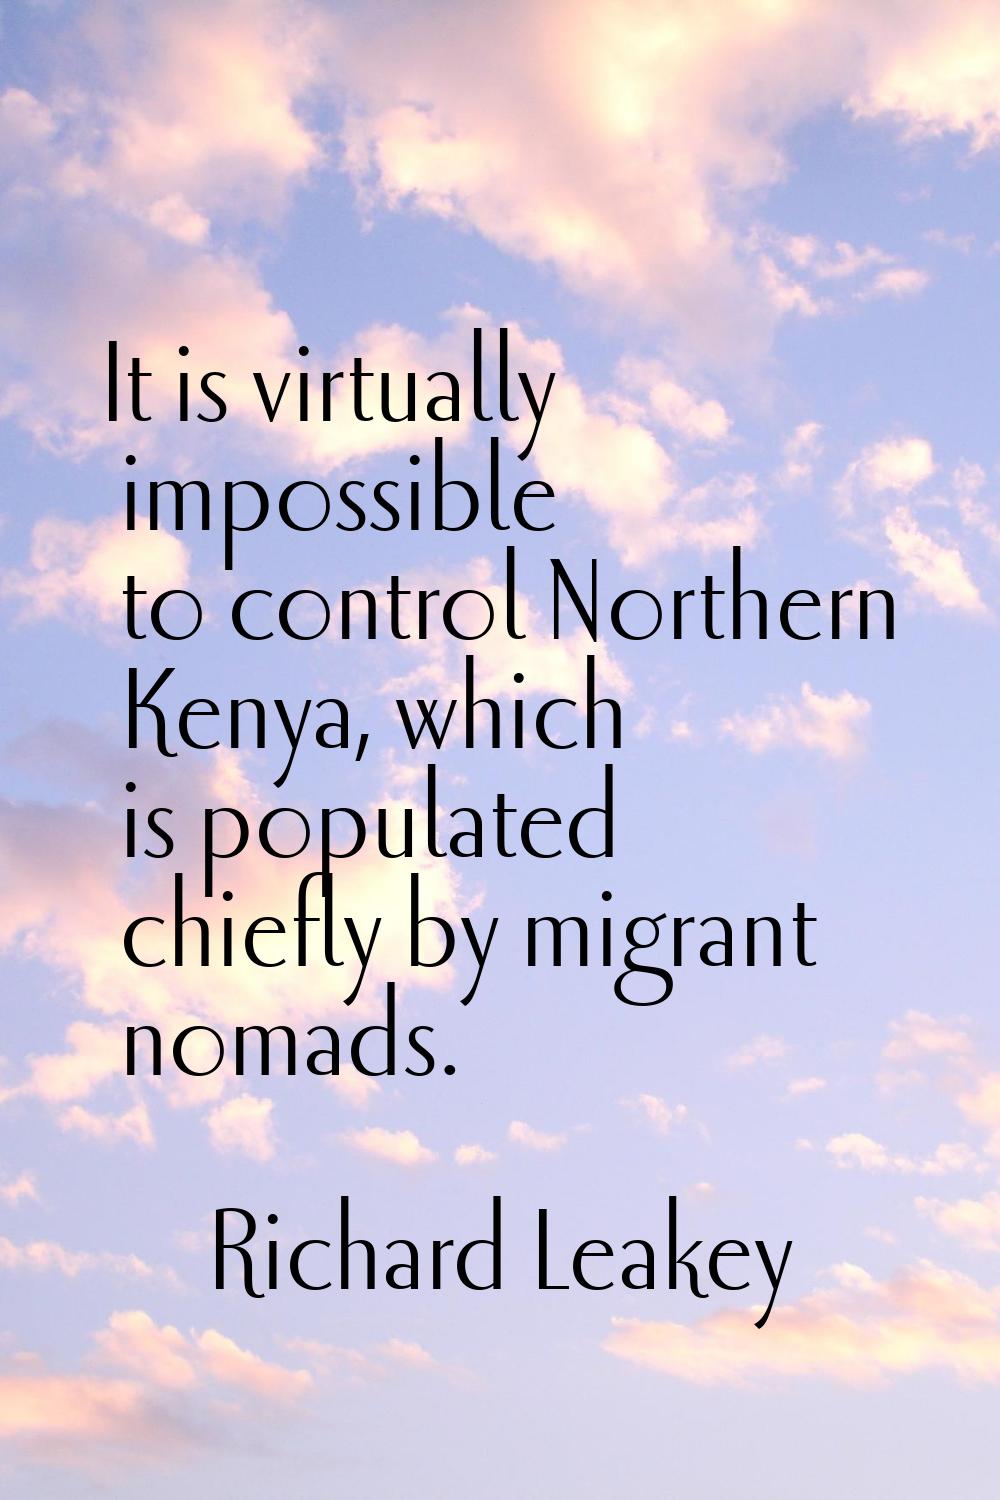 It is virtually impossible to control Northern Kenya, which is populated chiefly by migrant nomads.